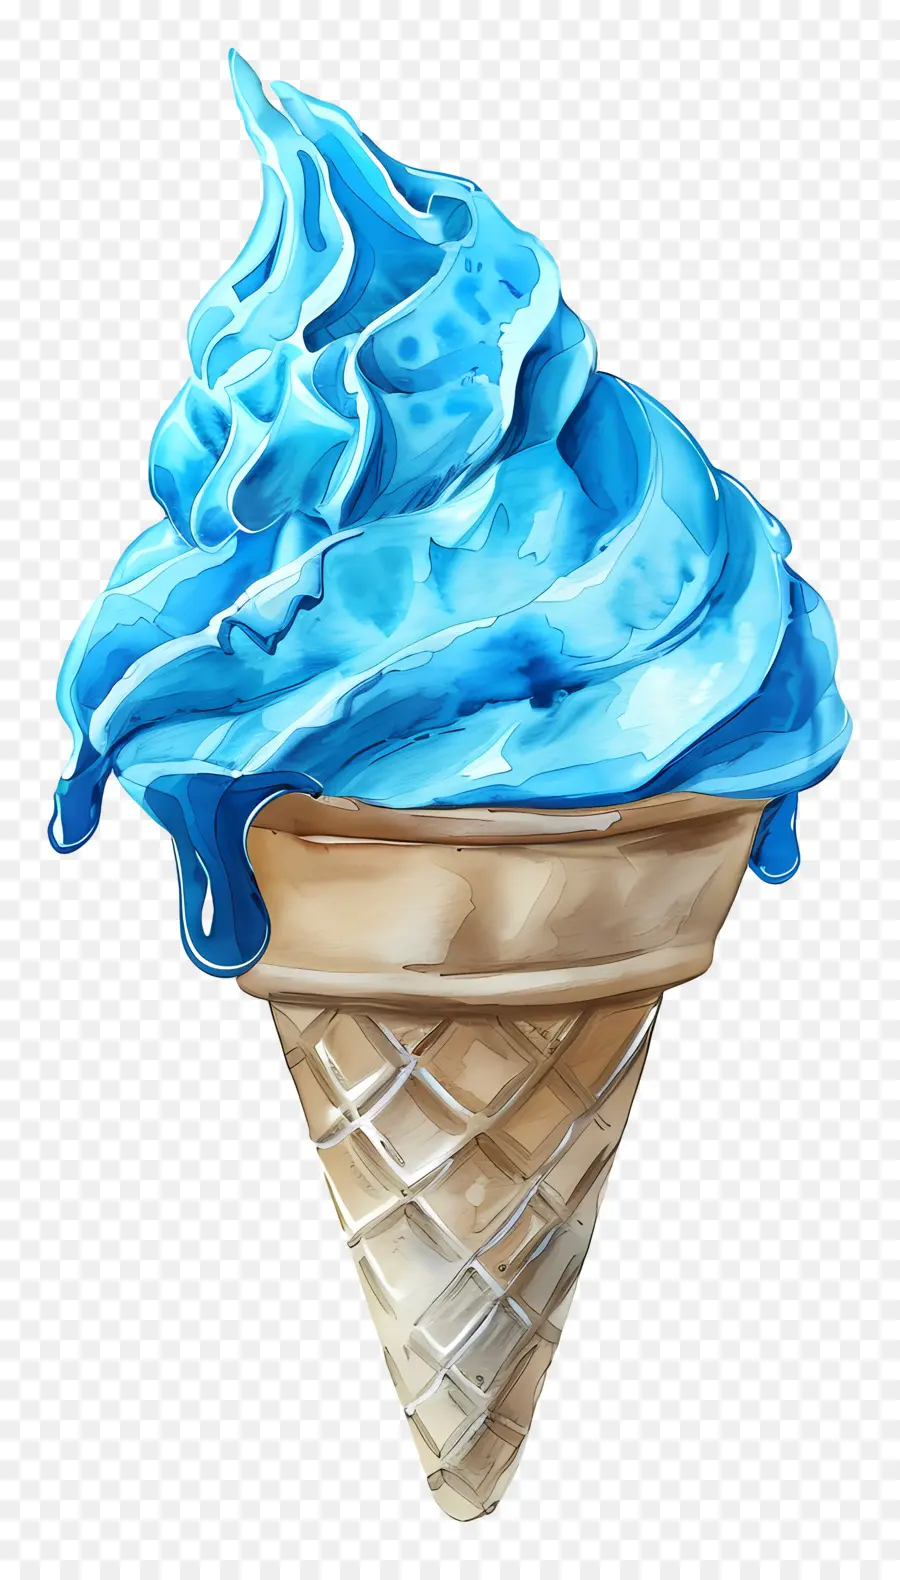 blue ice cream blue ice cream ice cream cone icy texture watery